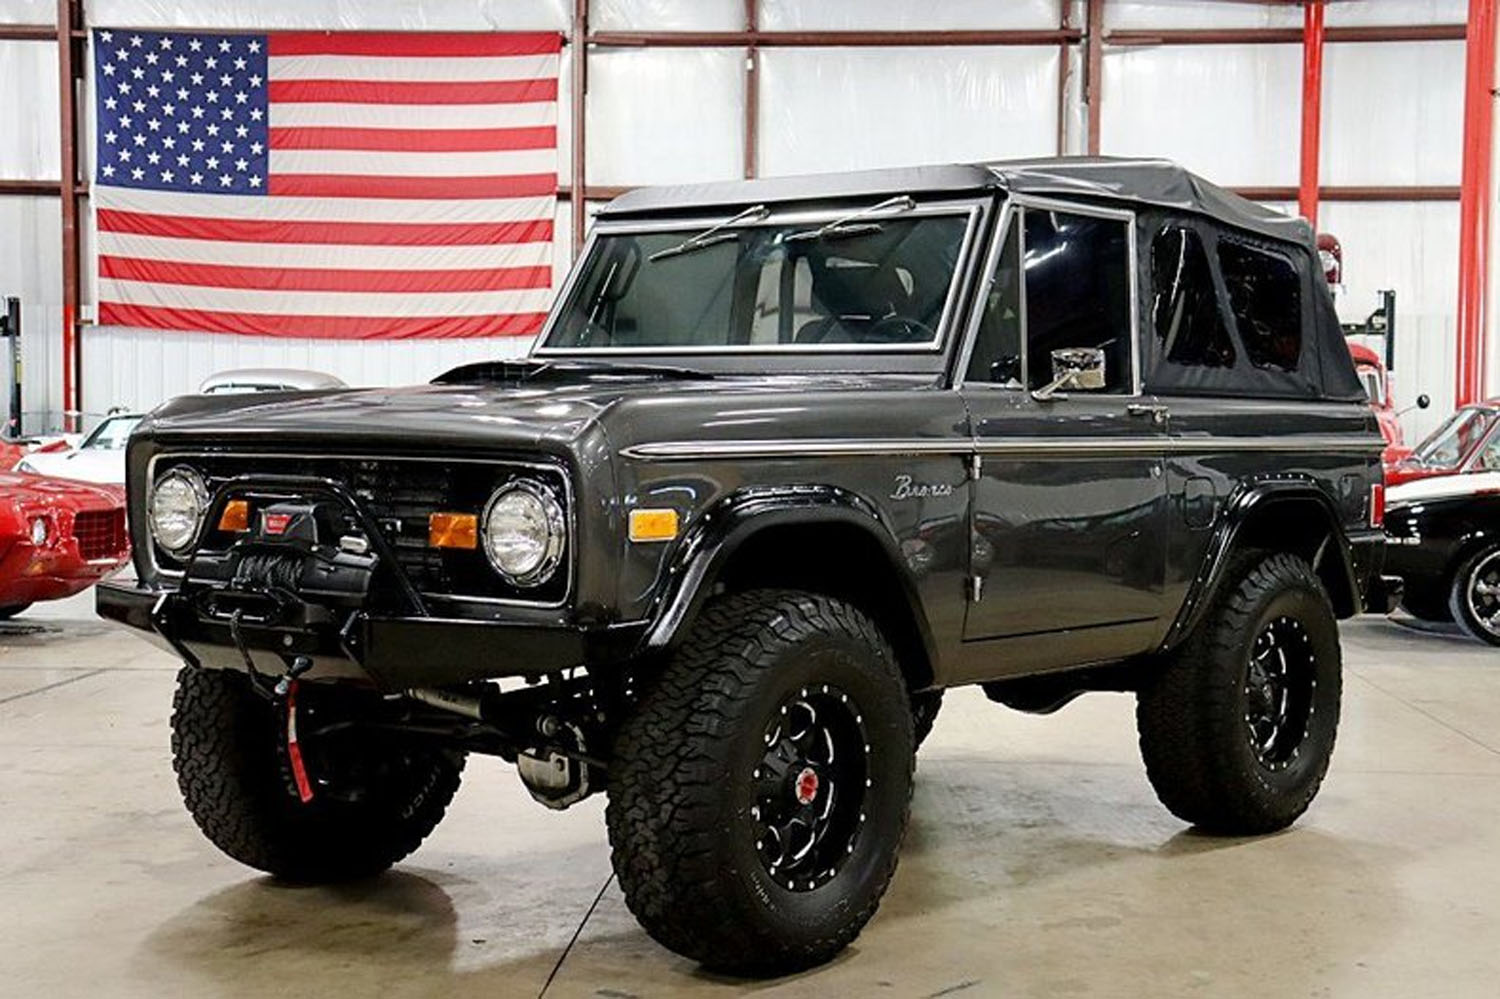 1977 Ford Bronco Has a 347 Stroker Heart